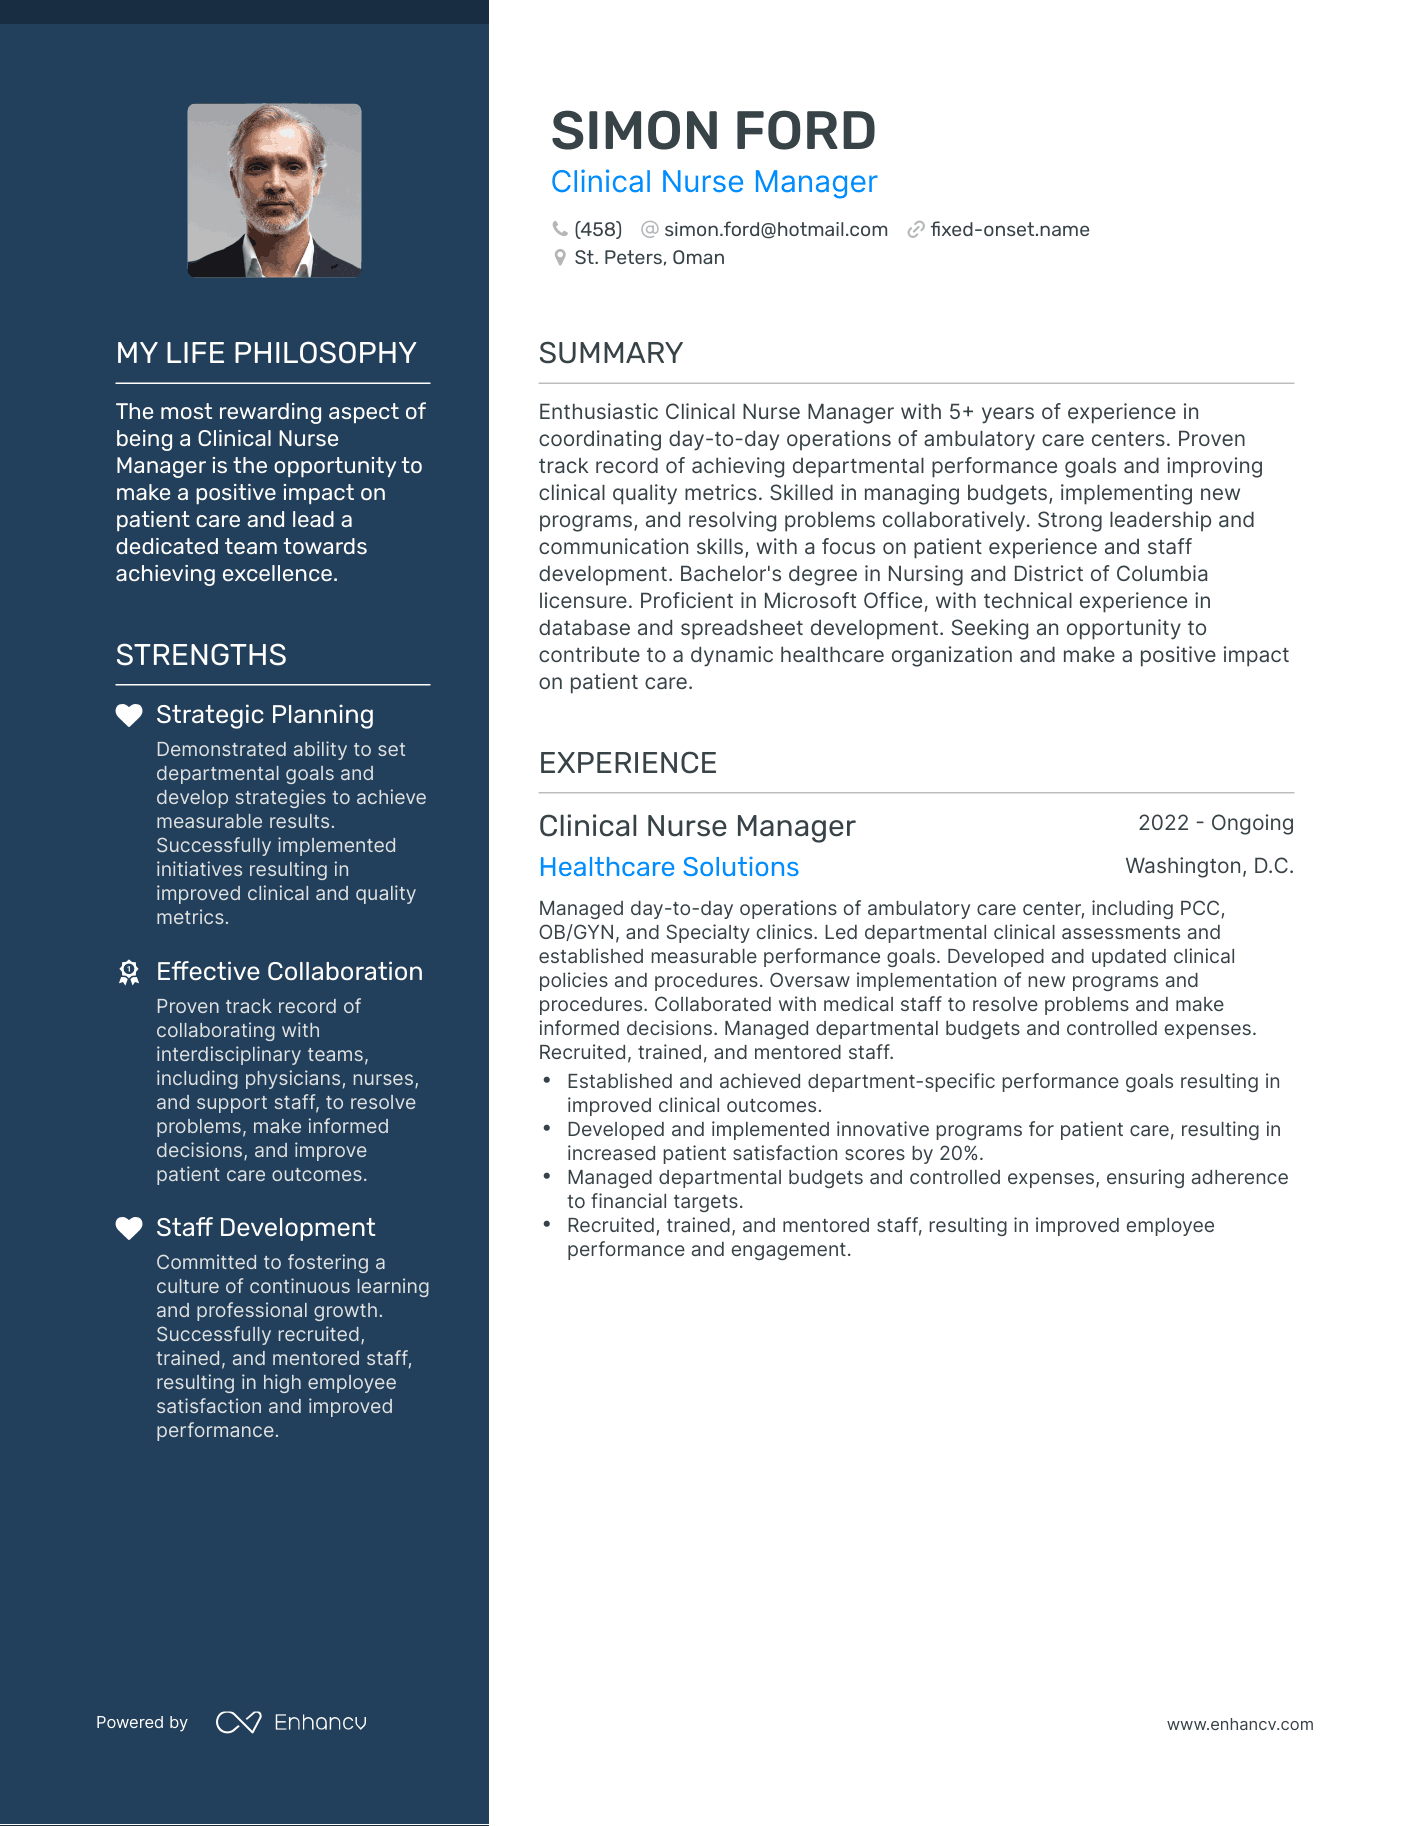 Clinical Nurse Manager resume example